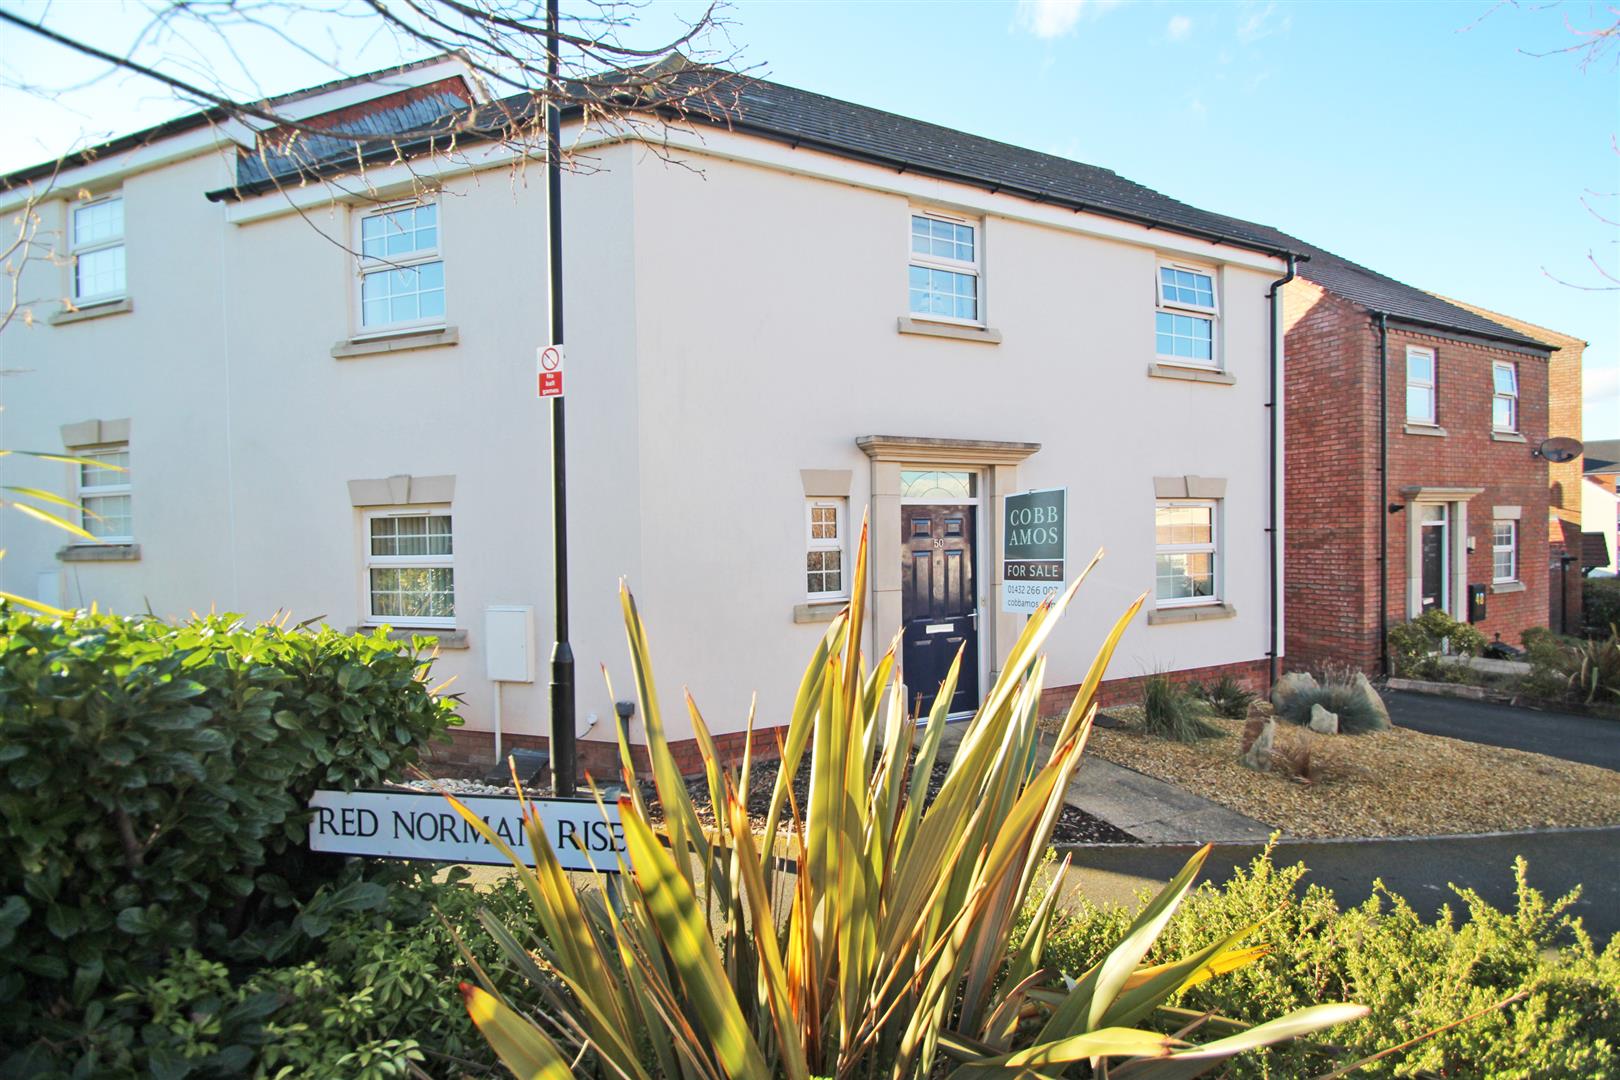 Red Norman Rise, Holmer, Hereford - Popular Location